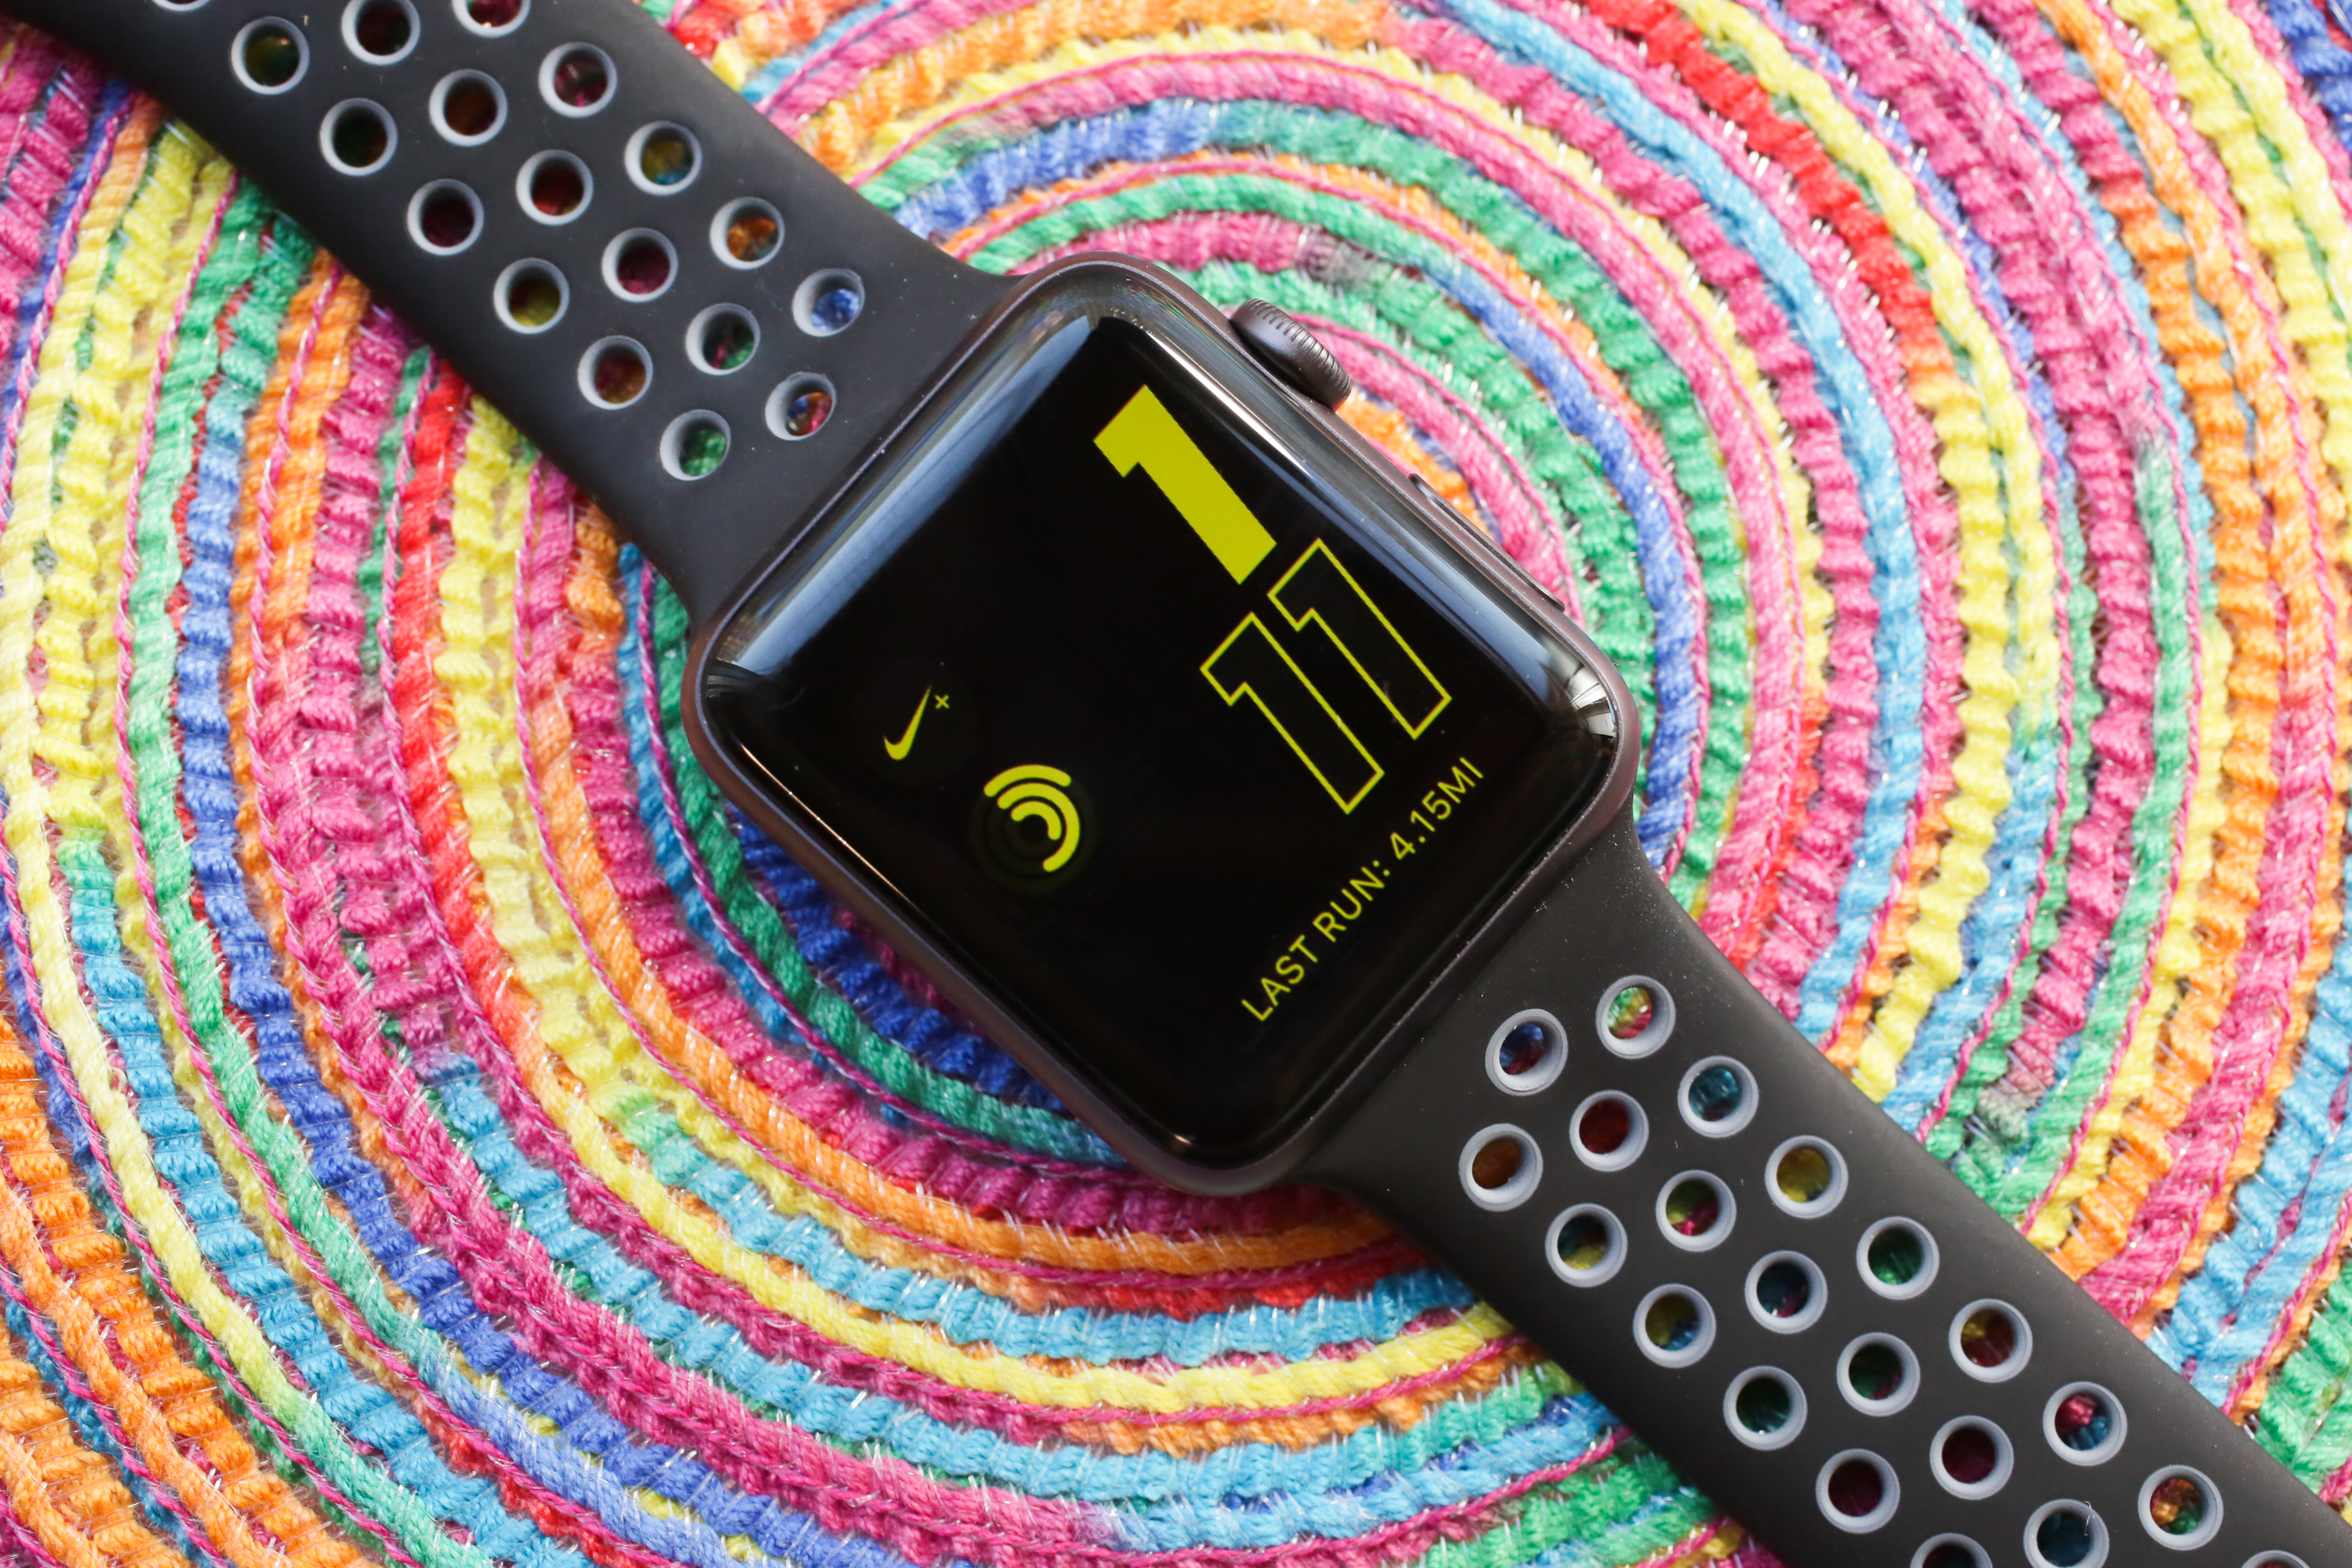 apple watch nike review